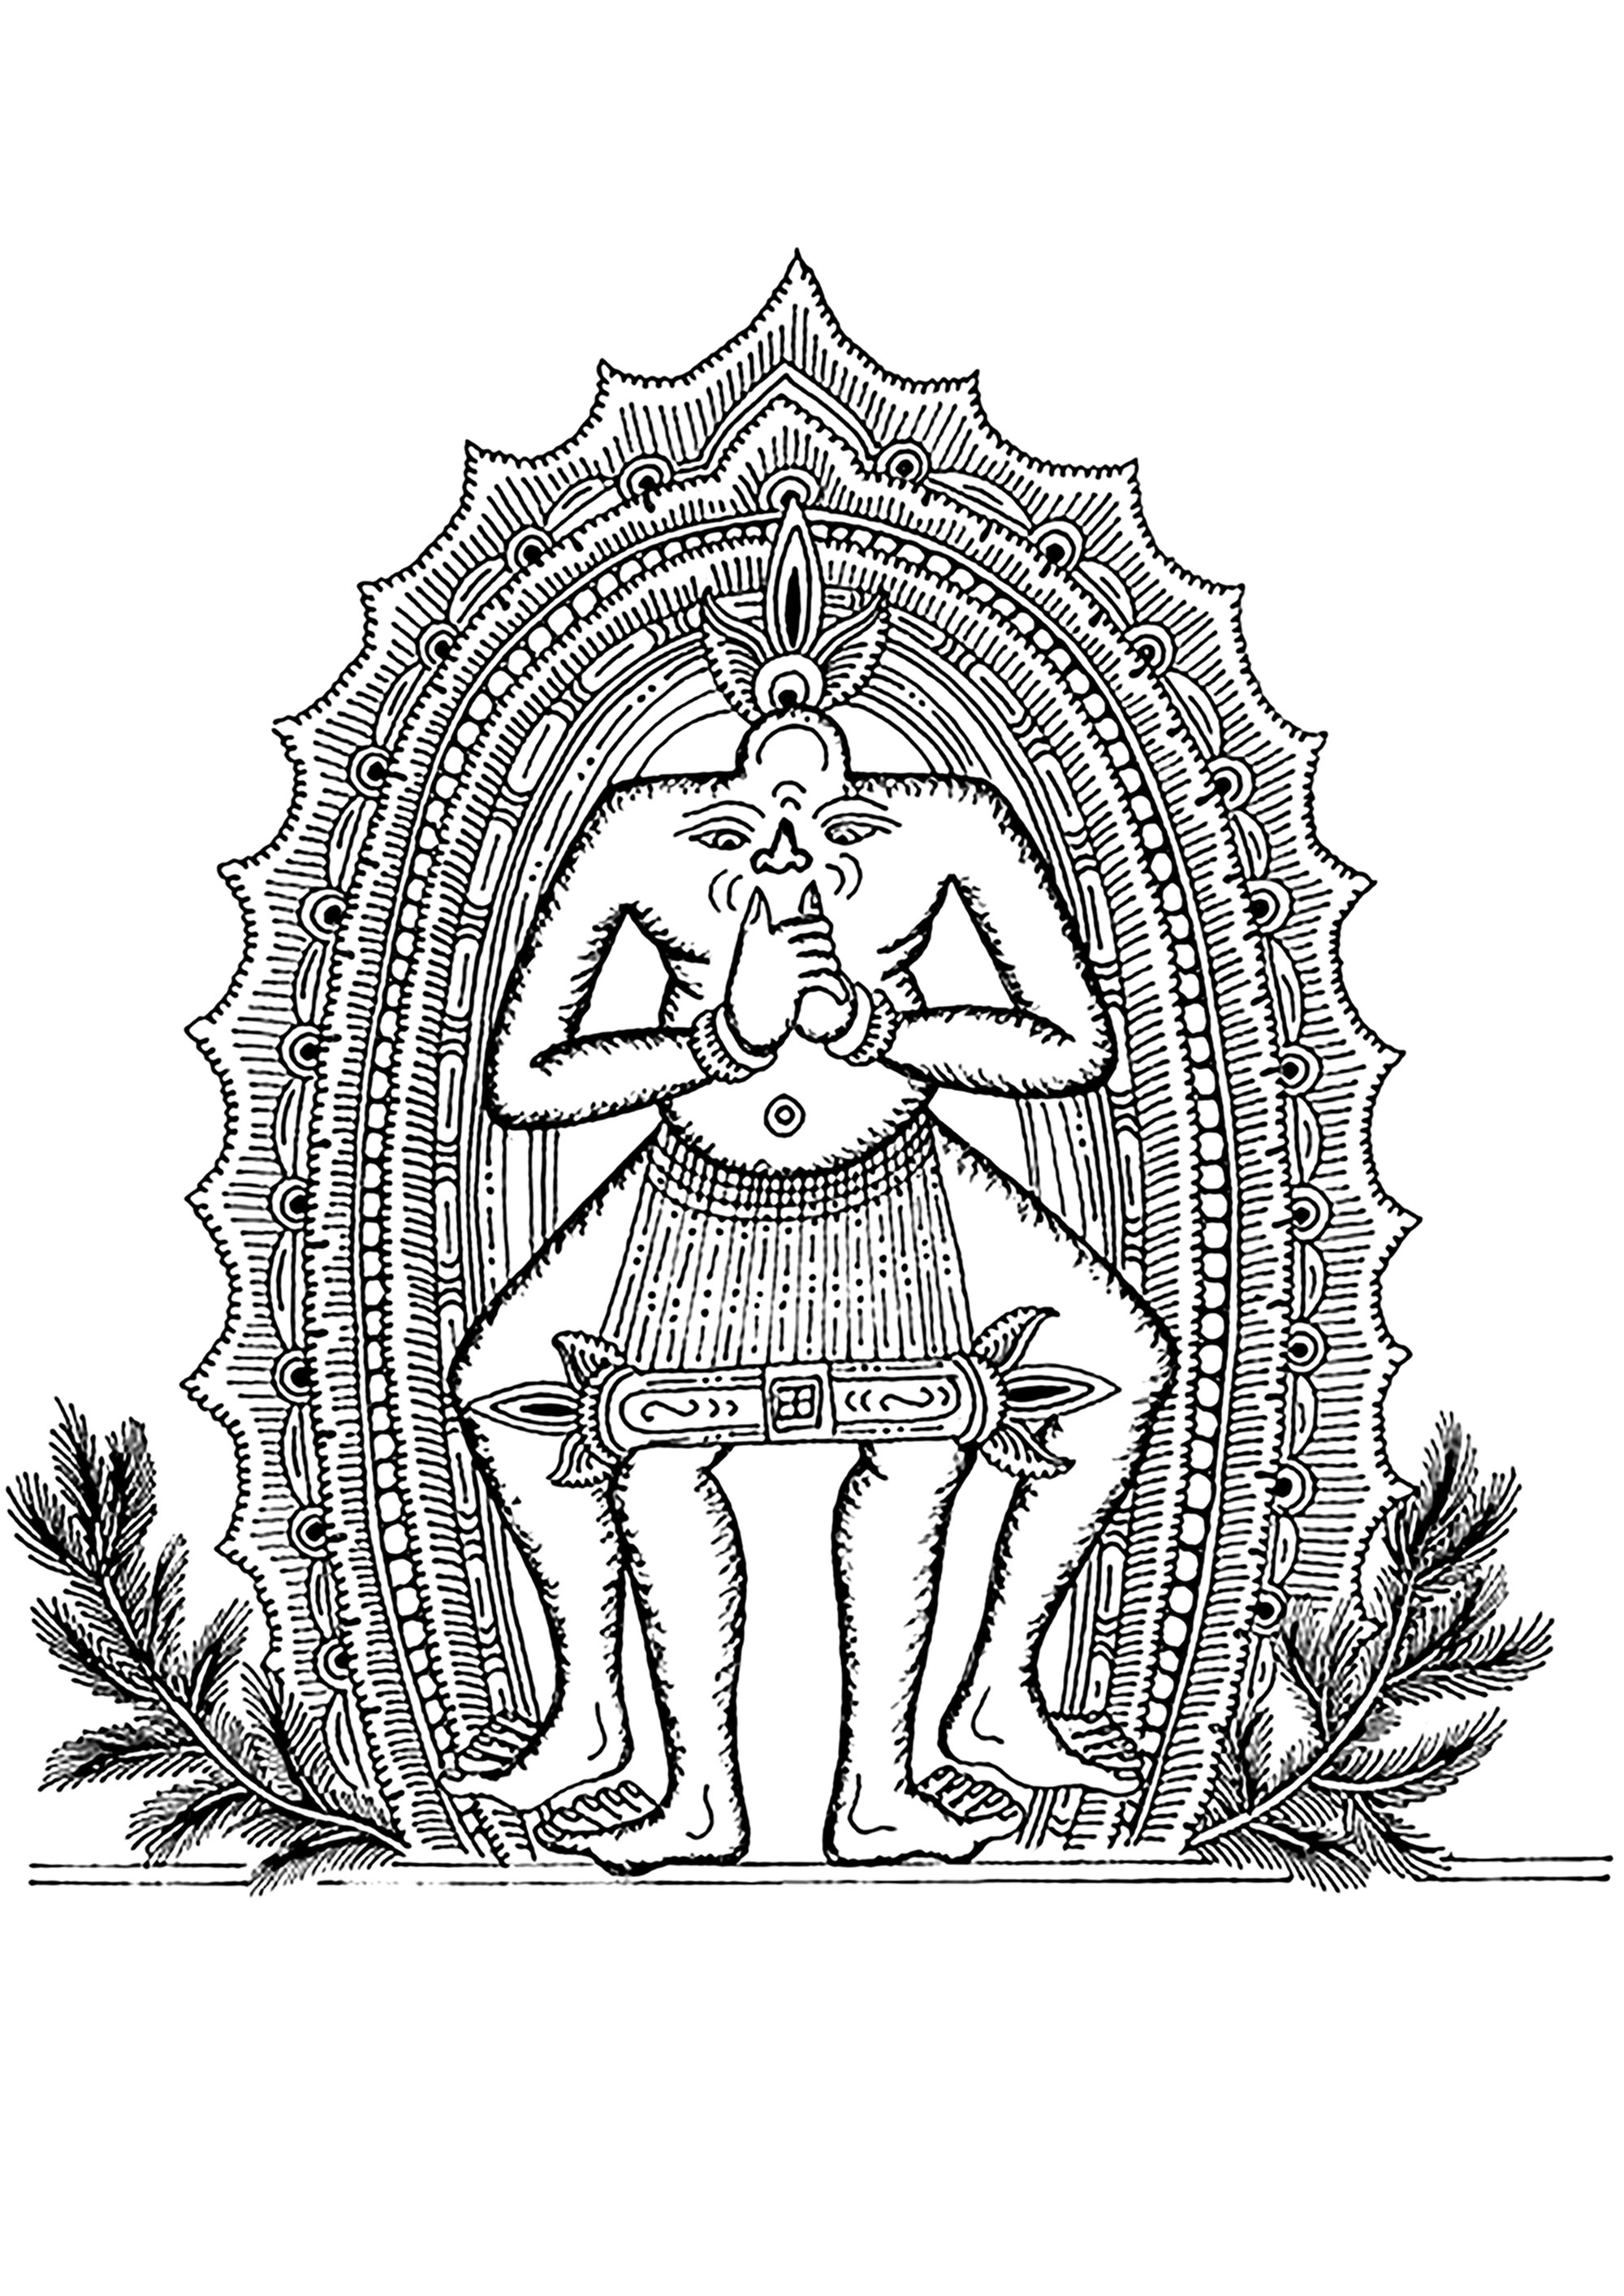 The balanced man, drawing by Ketut Liyer'. To find the balance you want, that's what you have to become. You have to keep your feet so firmly planted on the ground that it's is like having 4 legs instead of 2. This way you can stay in the world. But you have to stop looking at the world through your head. You have to look through your heart instead. In this way, you know God.' Ketut Liyer (Shaman in Bali). You can read the book 'Eat, Pray, Love' or watch the movie for more informations !